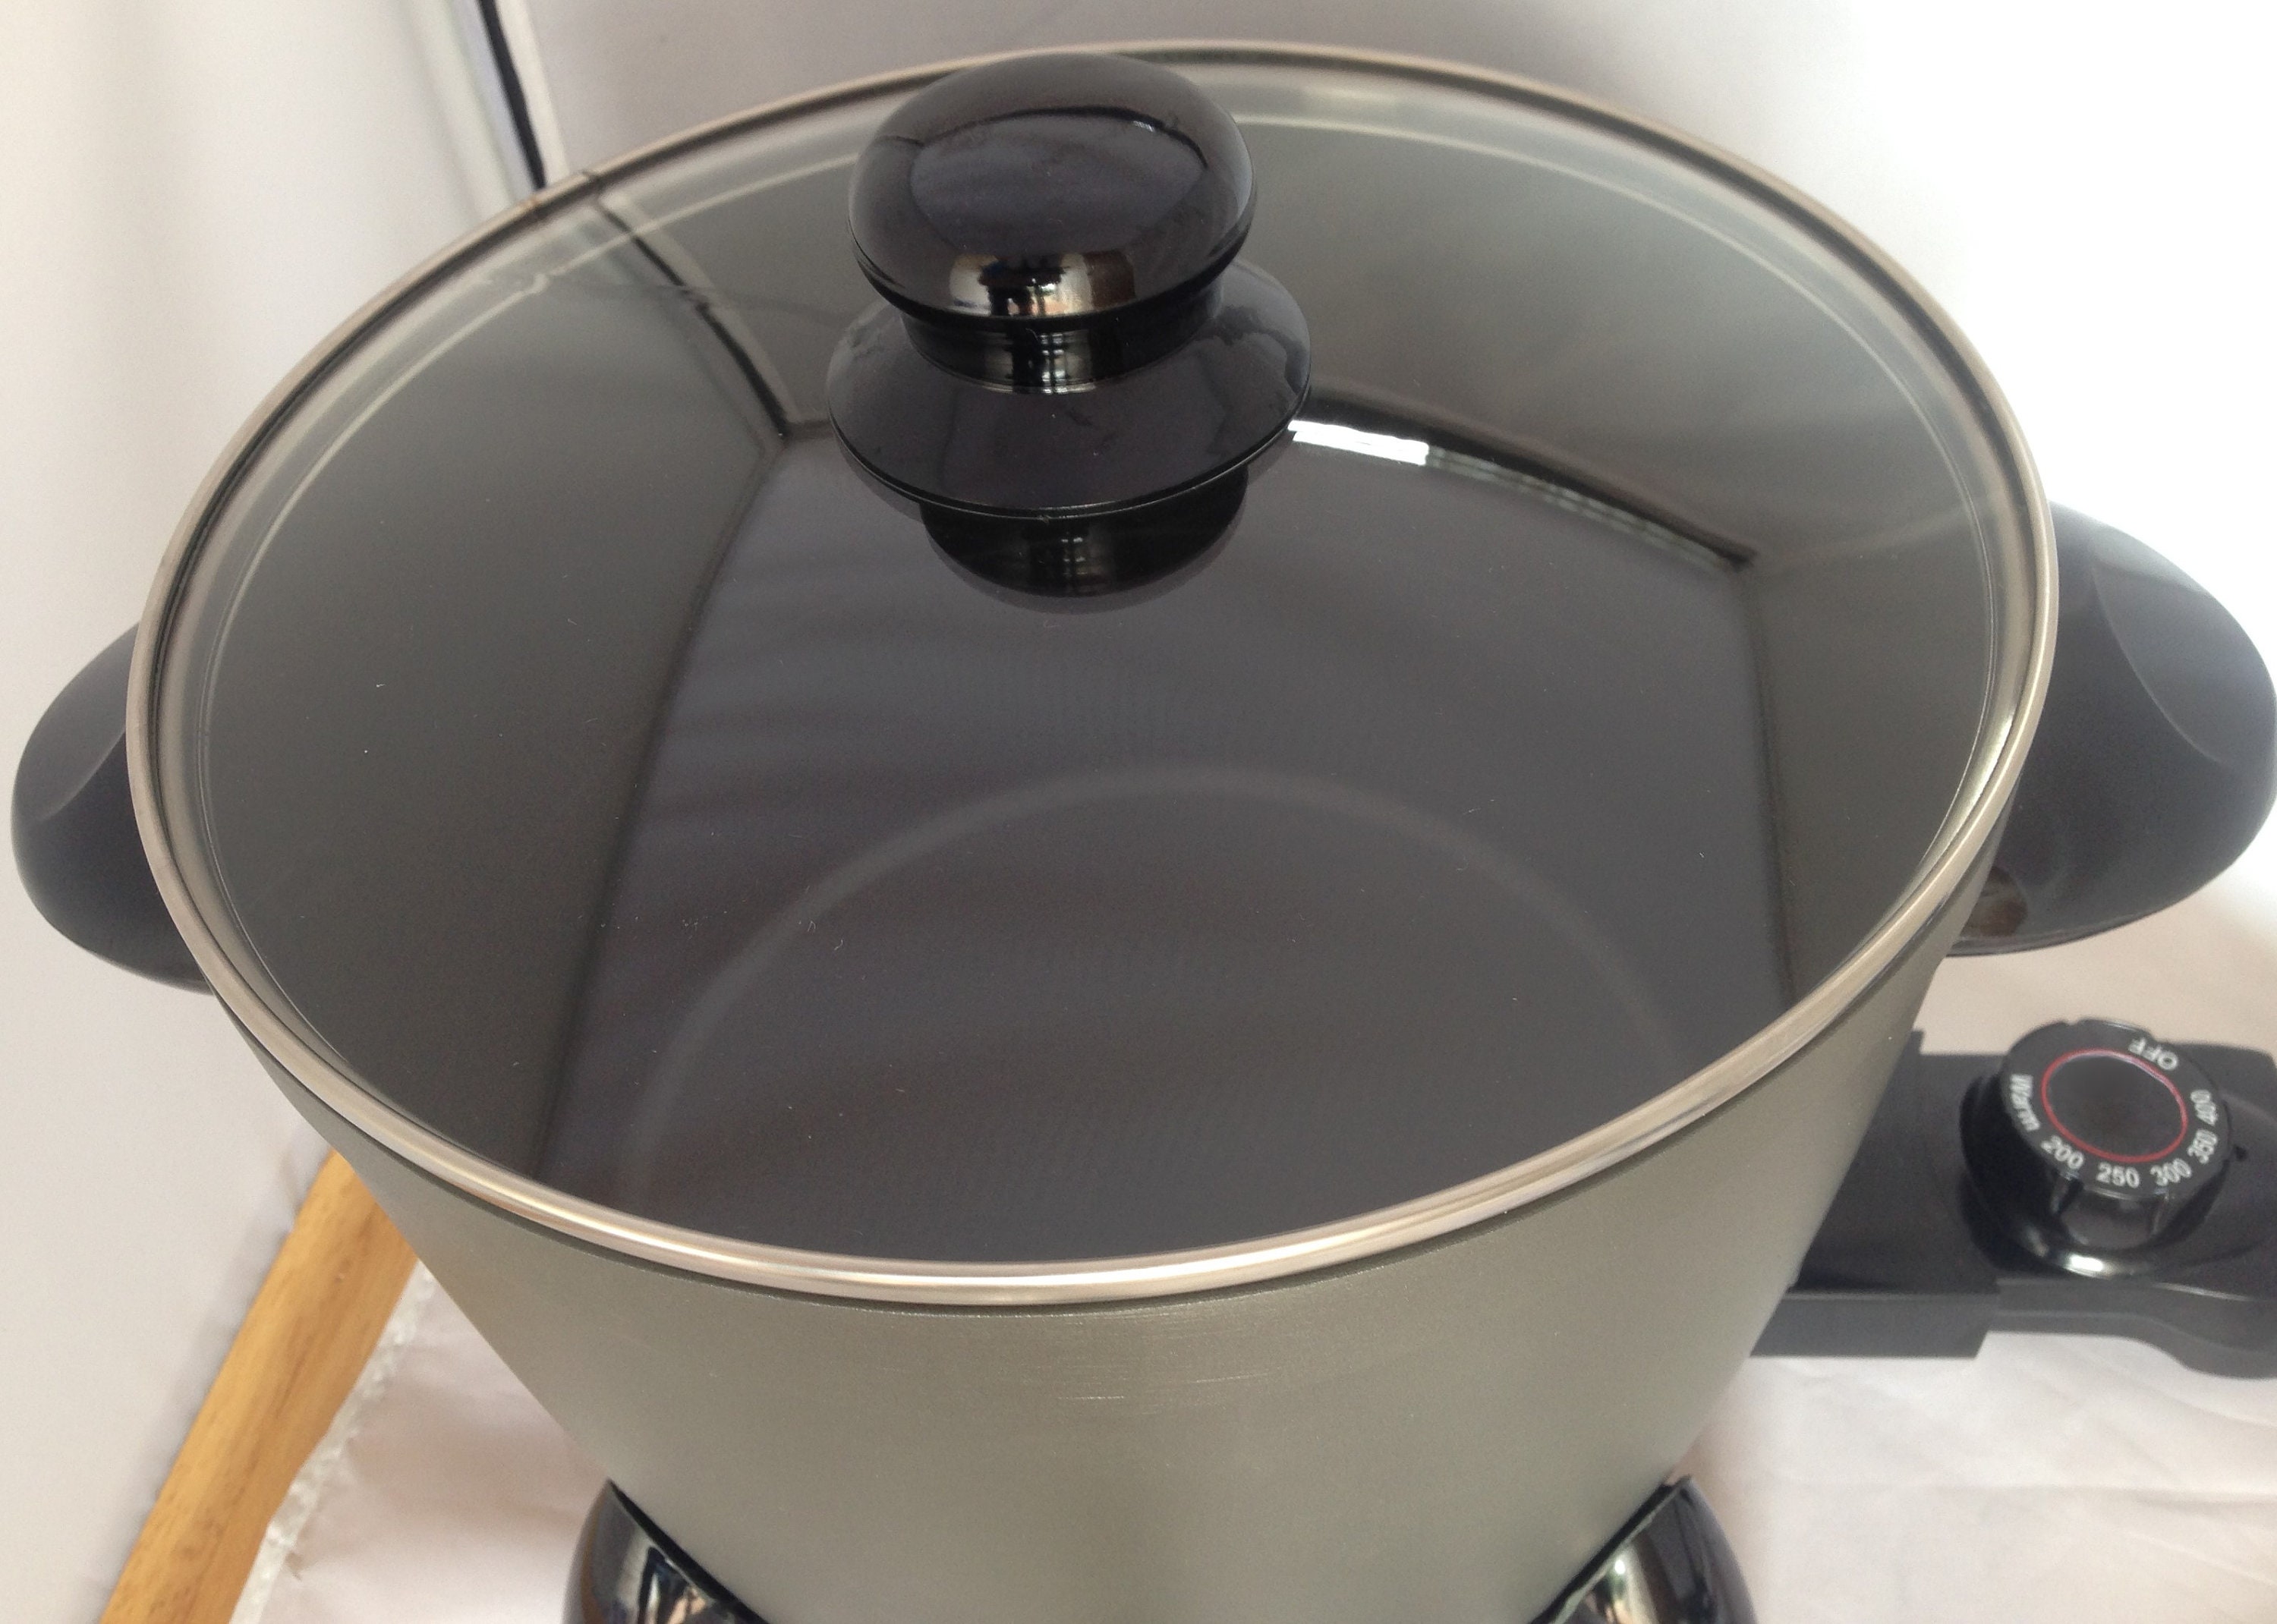 Wax Melter for Candle Making Multifunctional Hot Plate for Candle Making 